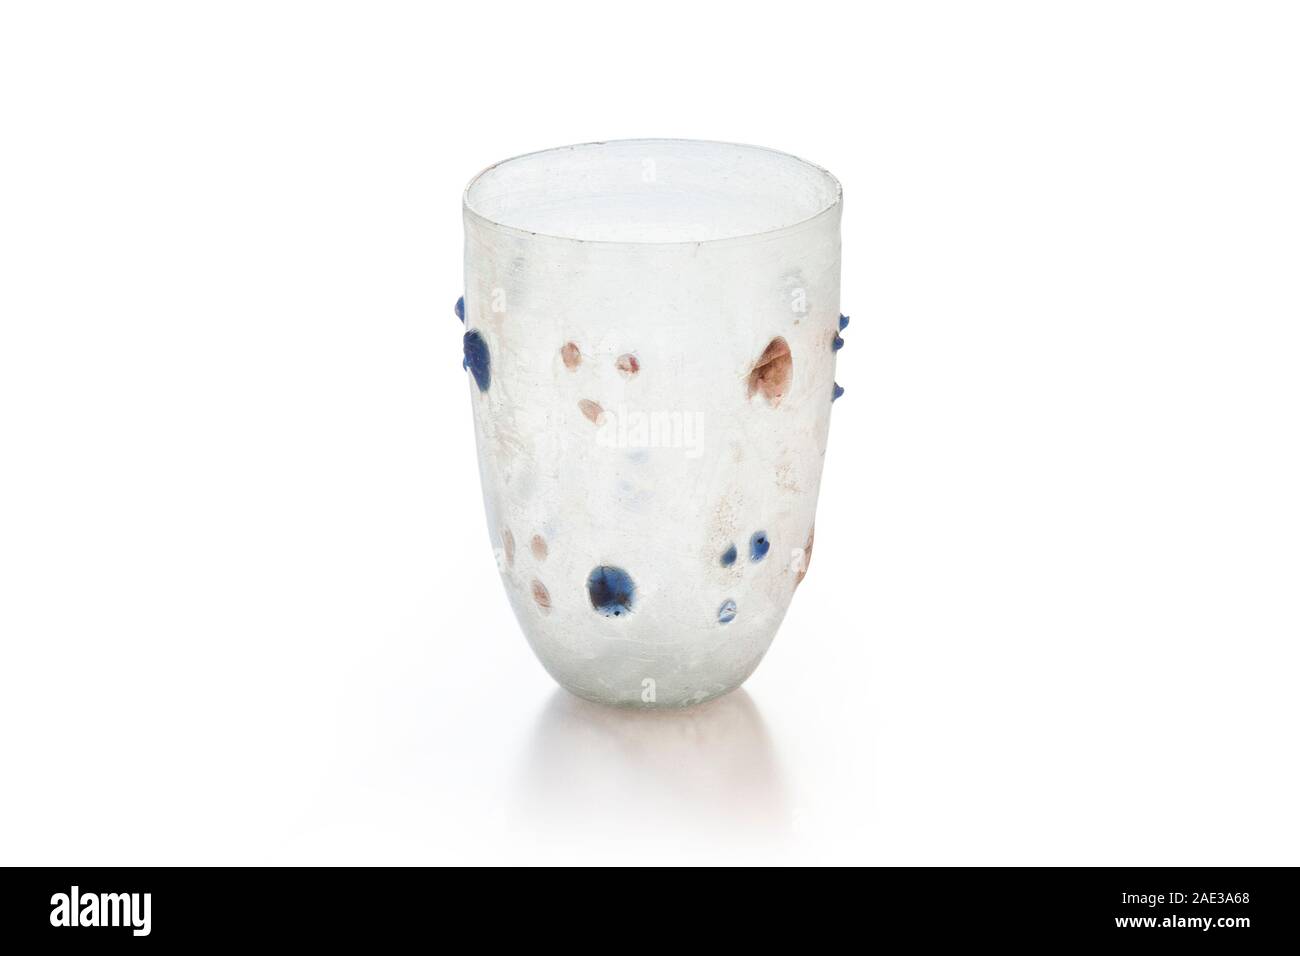 Ancient Roman cup with large and small nubs. Mould-blown glass and with coloured nubs. 3rd-4th century A.D. Clipping path for design purpopes. Stock Photo